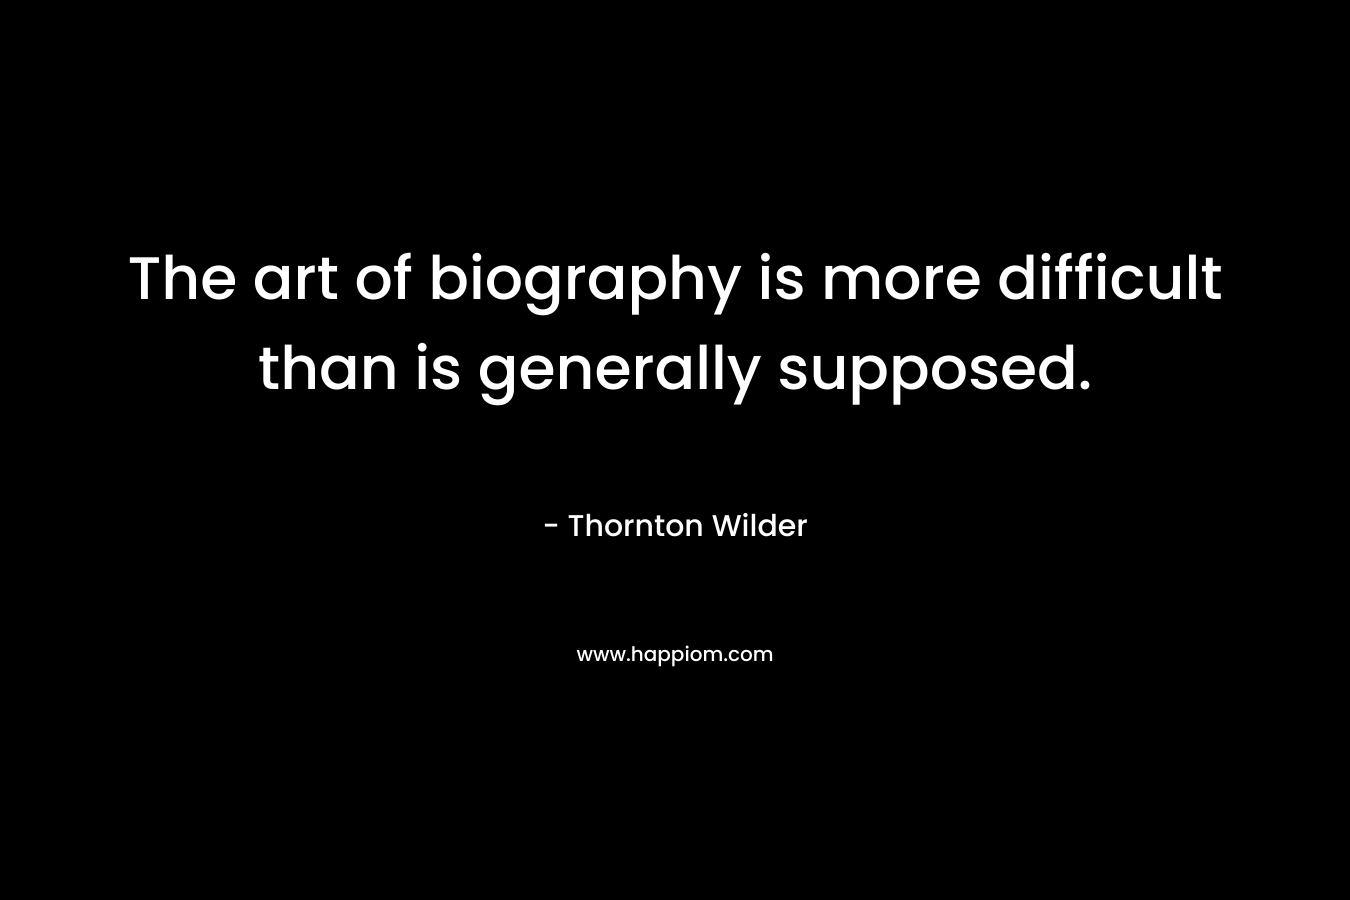 The art of biography is more difficult than is generally supposed. – Thornton Wilder